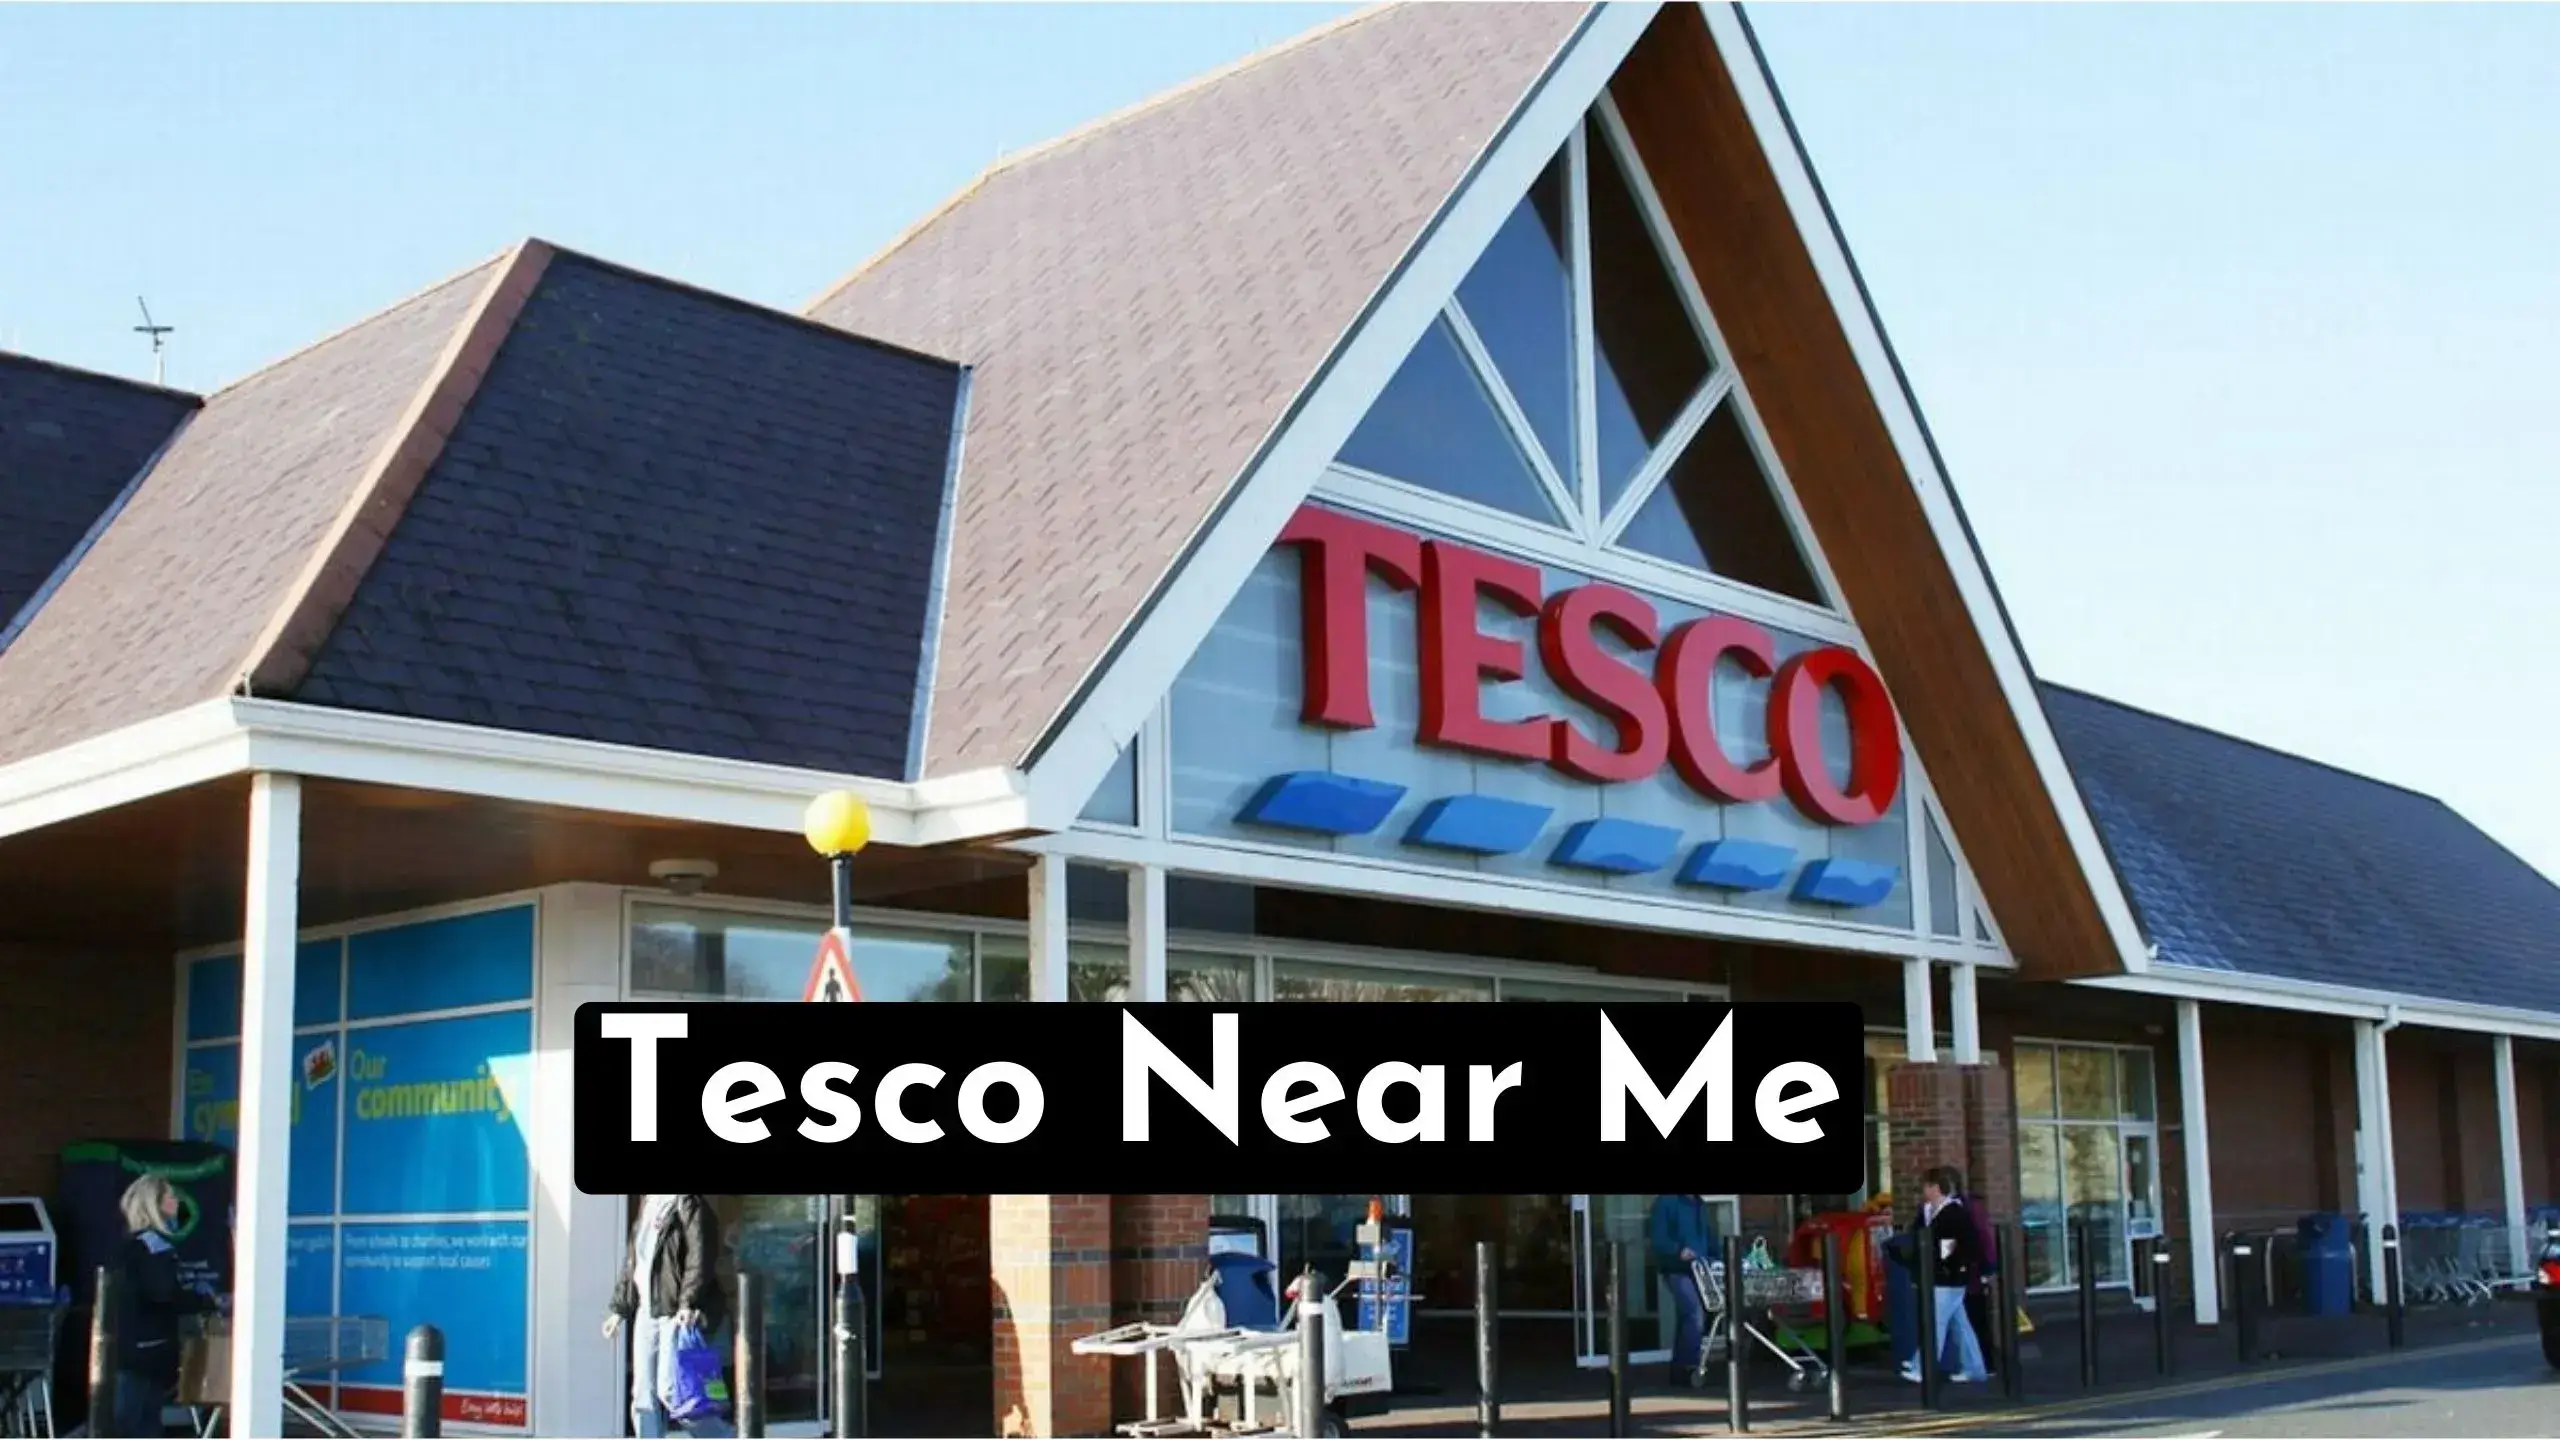 Tesco Near Me: The Easiest Way to Find Your Closest Store